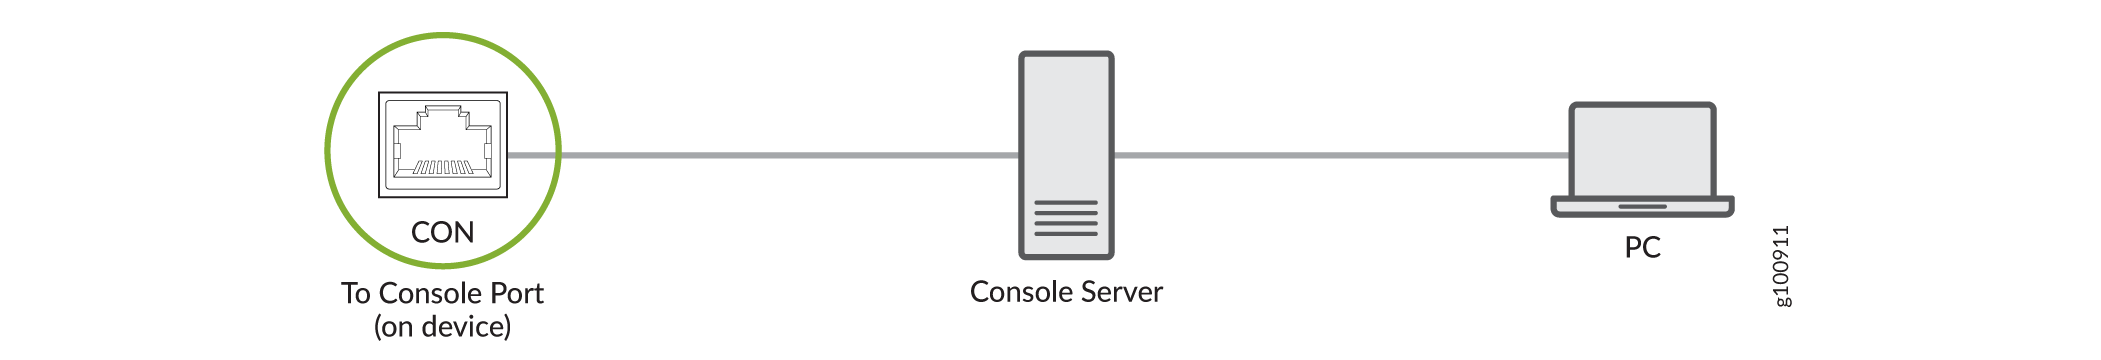 Connect the MX10004 Router to a Management Console Through a Console Server